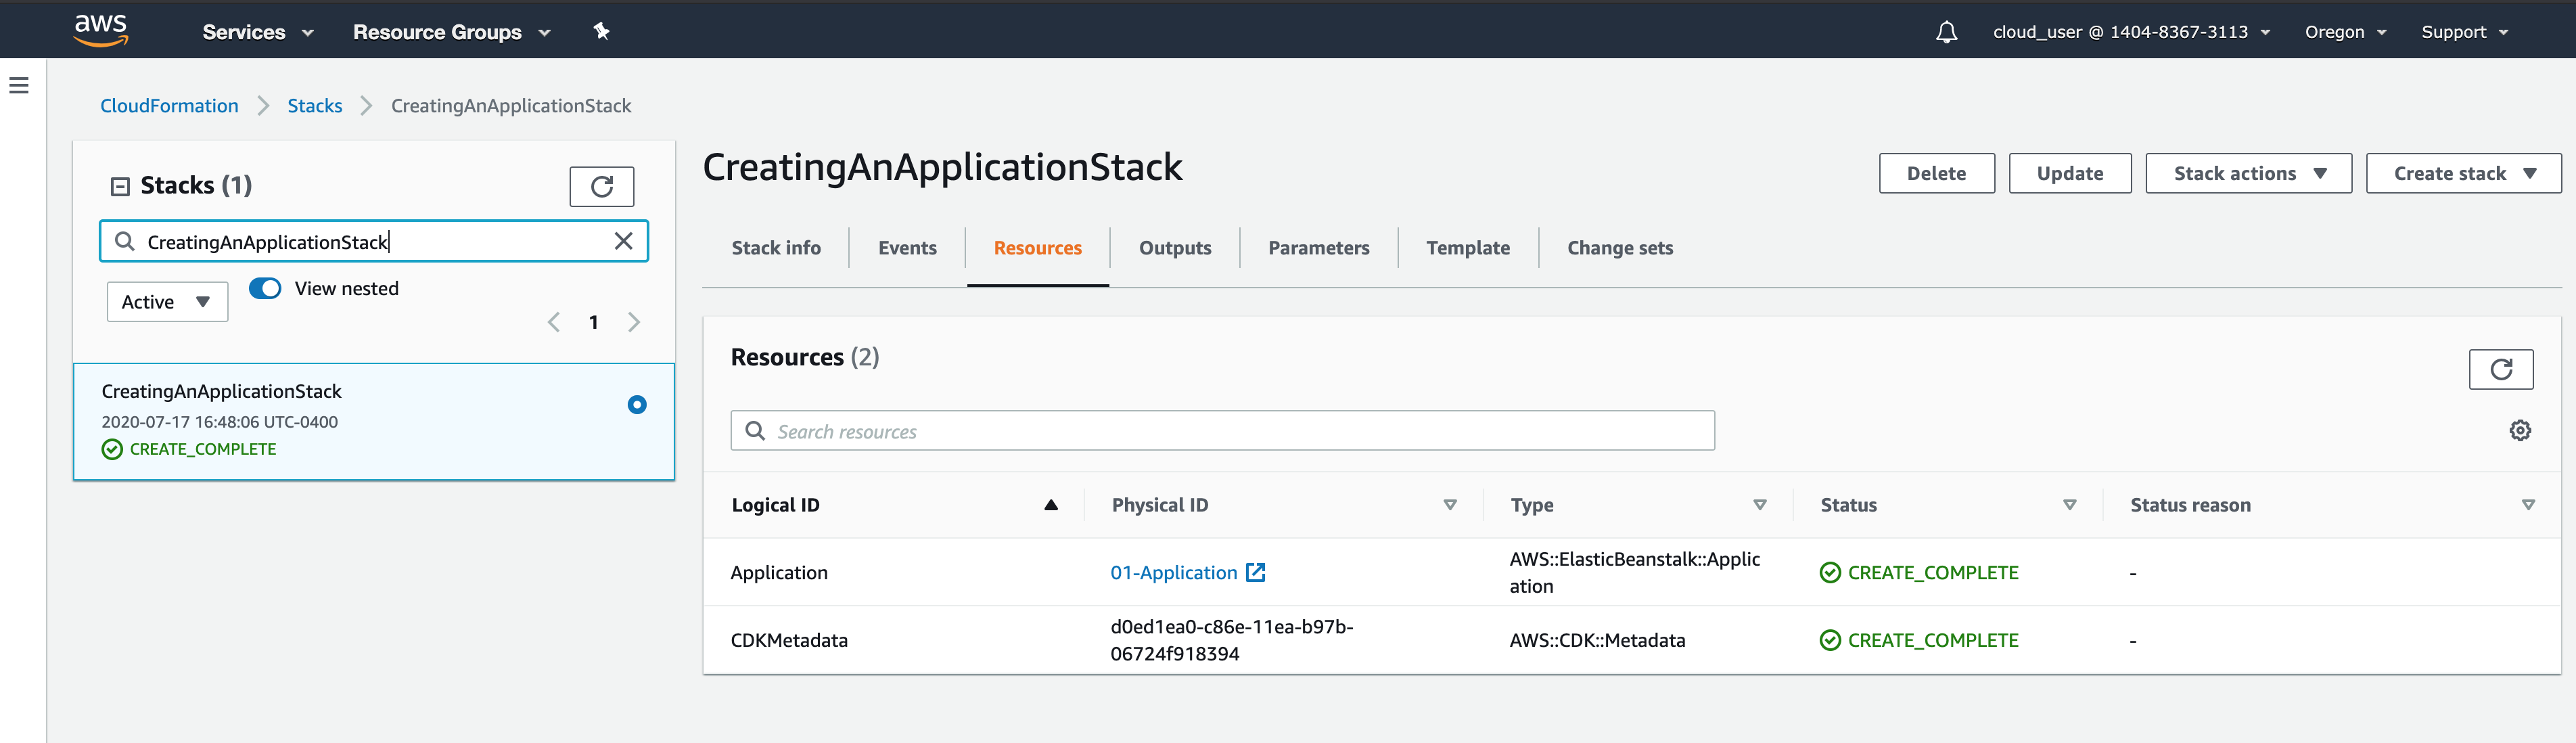 AWS CloudFormation Console